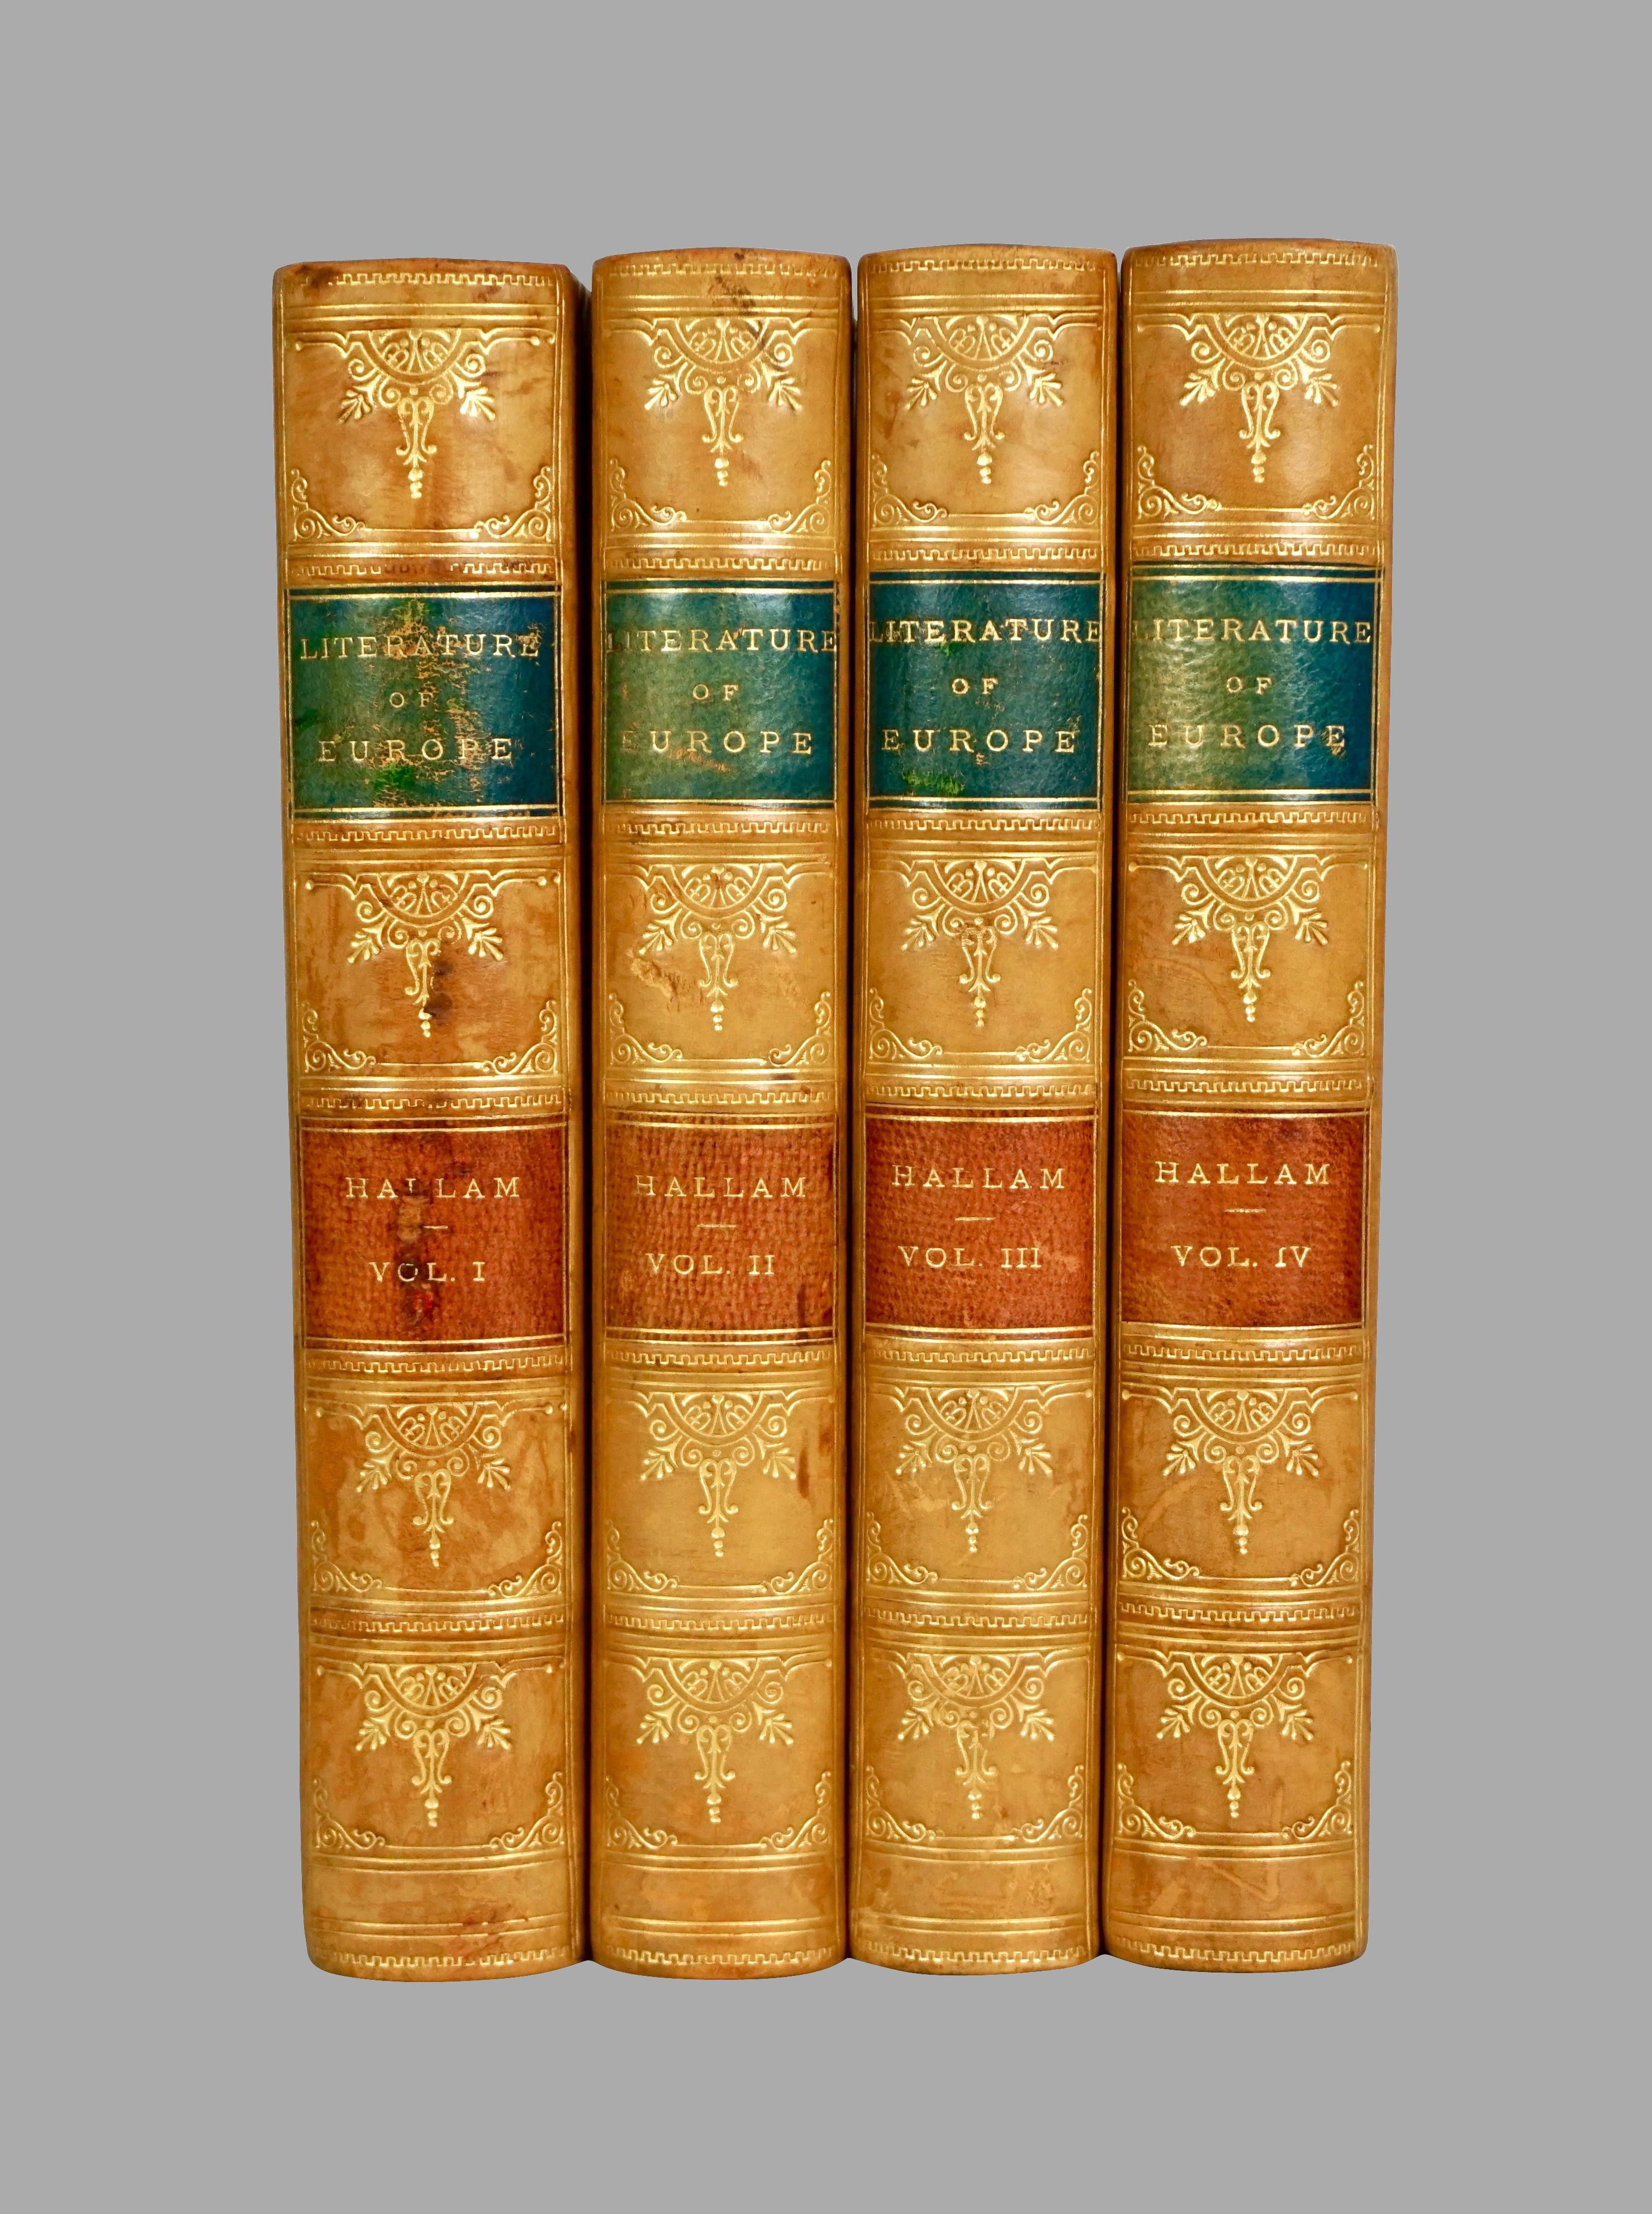 A set of 10 leather bound volumes by Henry Hallam, a distinguished and prolific Oxford educated Victorian historian. The group includes 3 volume history of England, 3 volume History of the Middle Ages, and 4 volumes on English Literature. Each